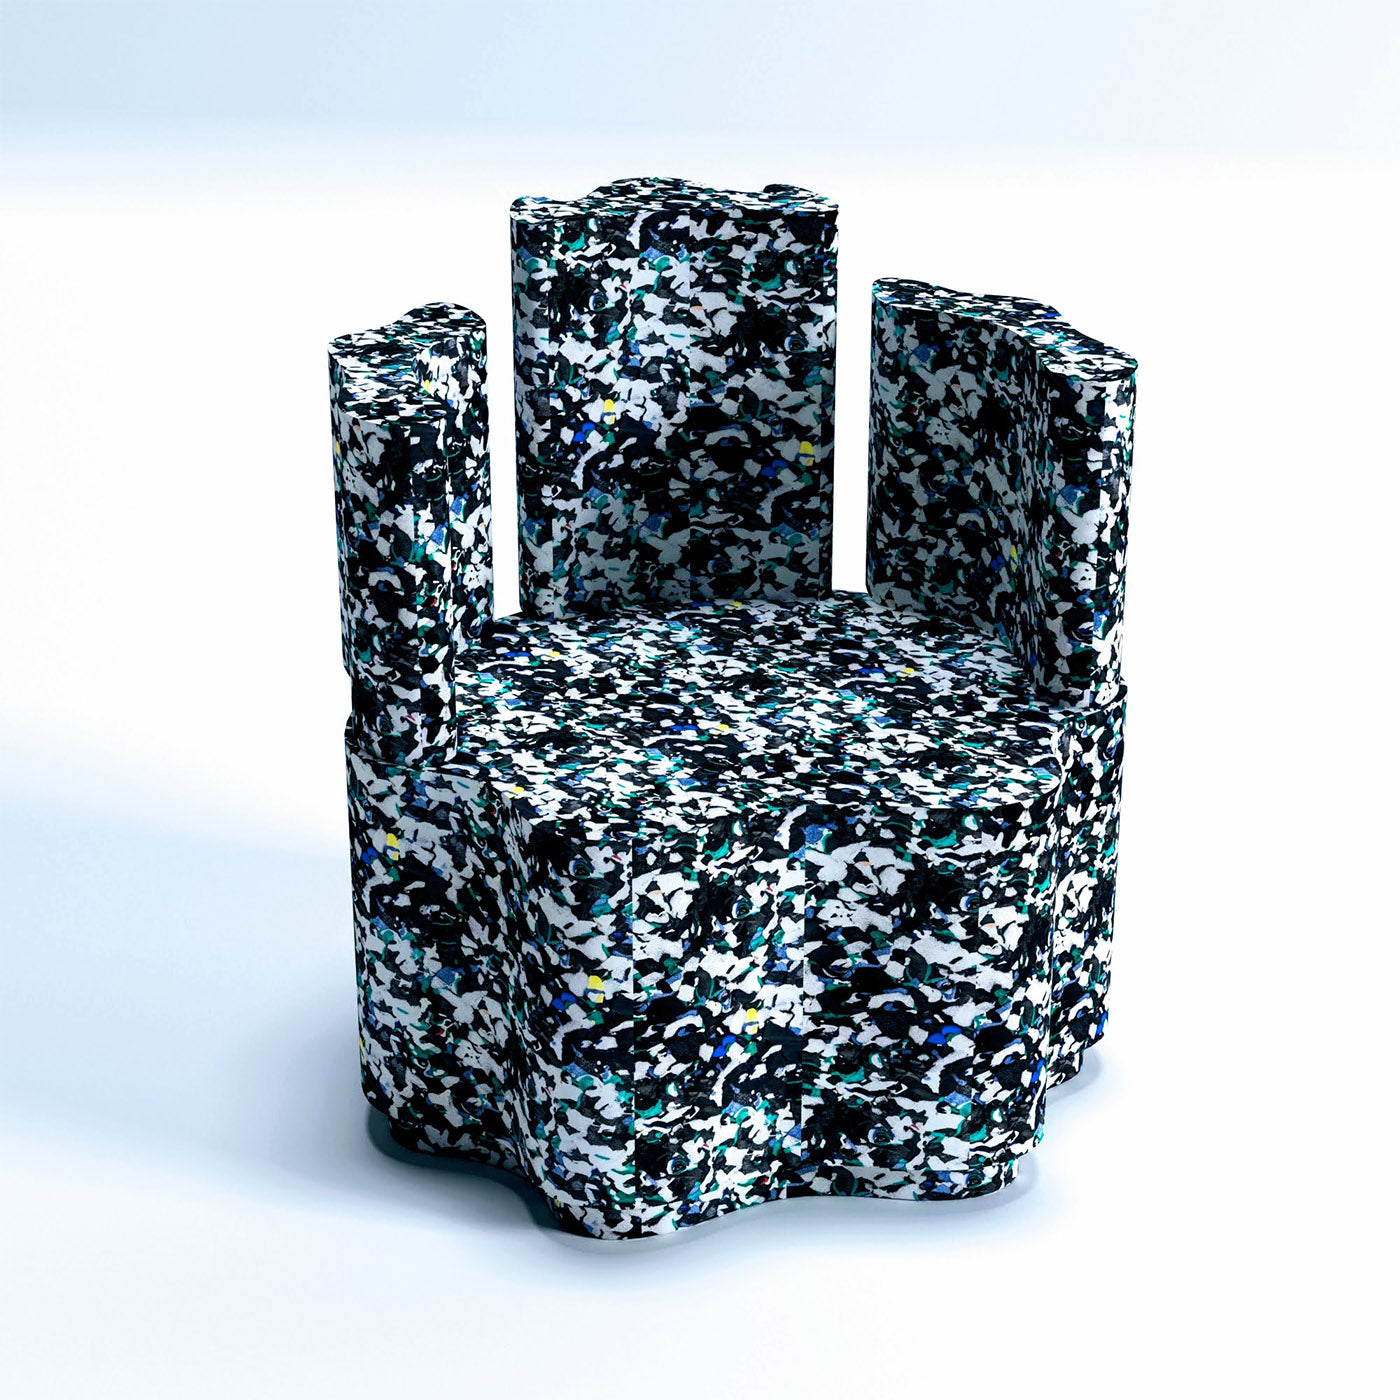 Patatina Recycled Armchair By Clemence Seilles - Alternative view 2